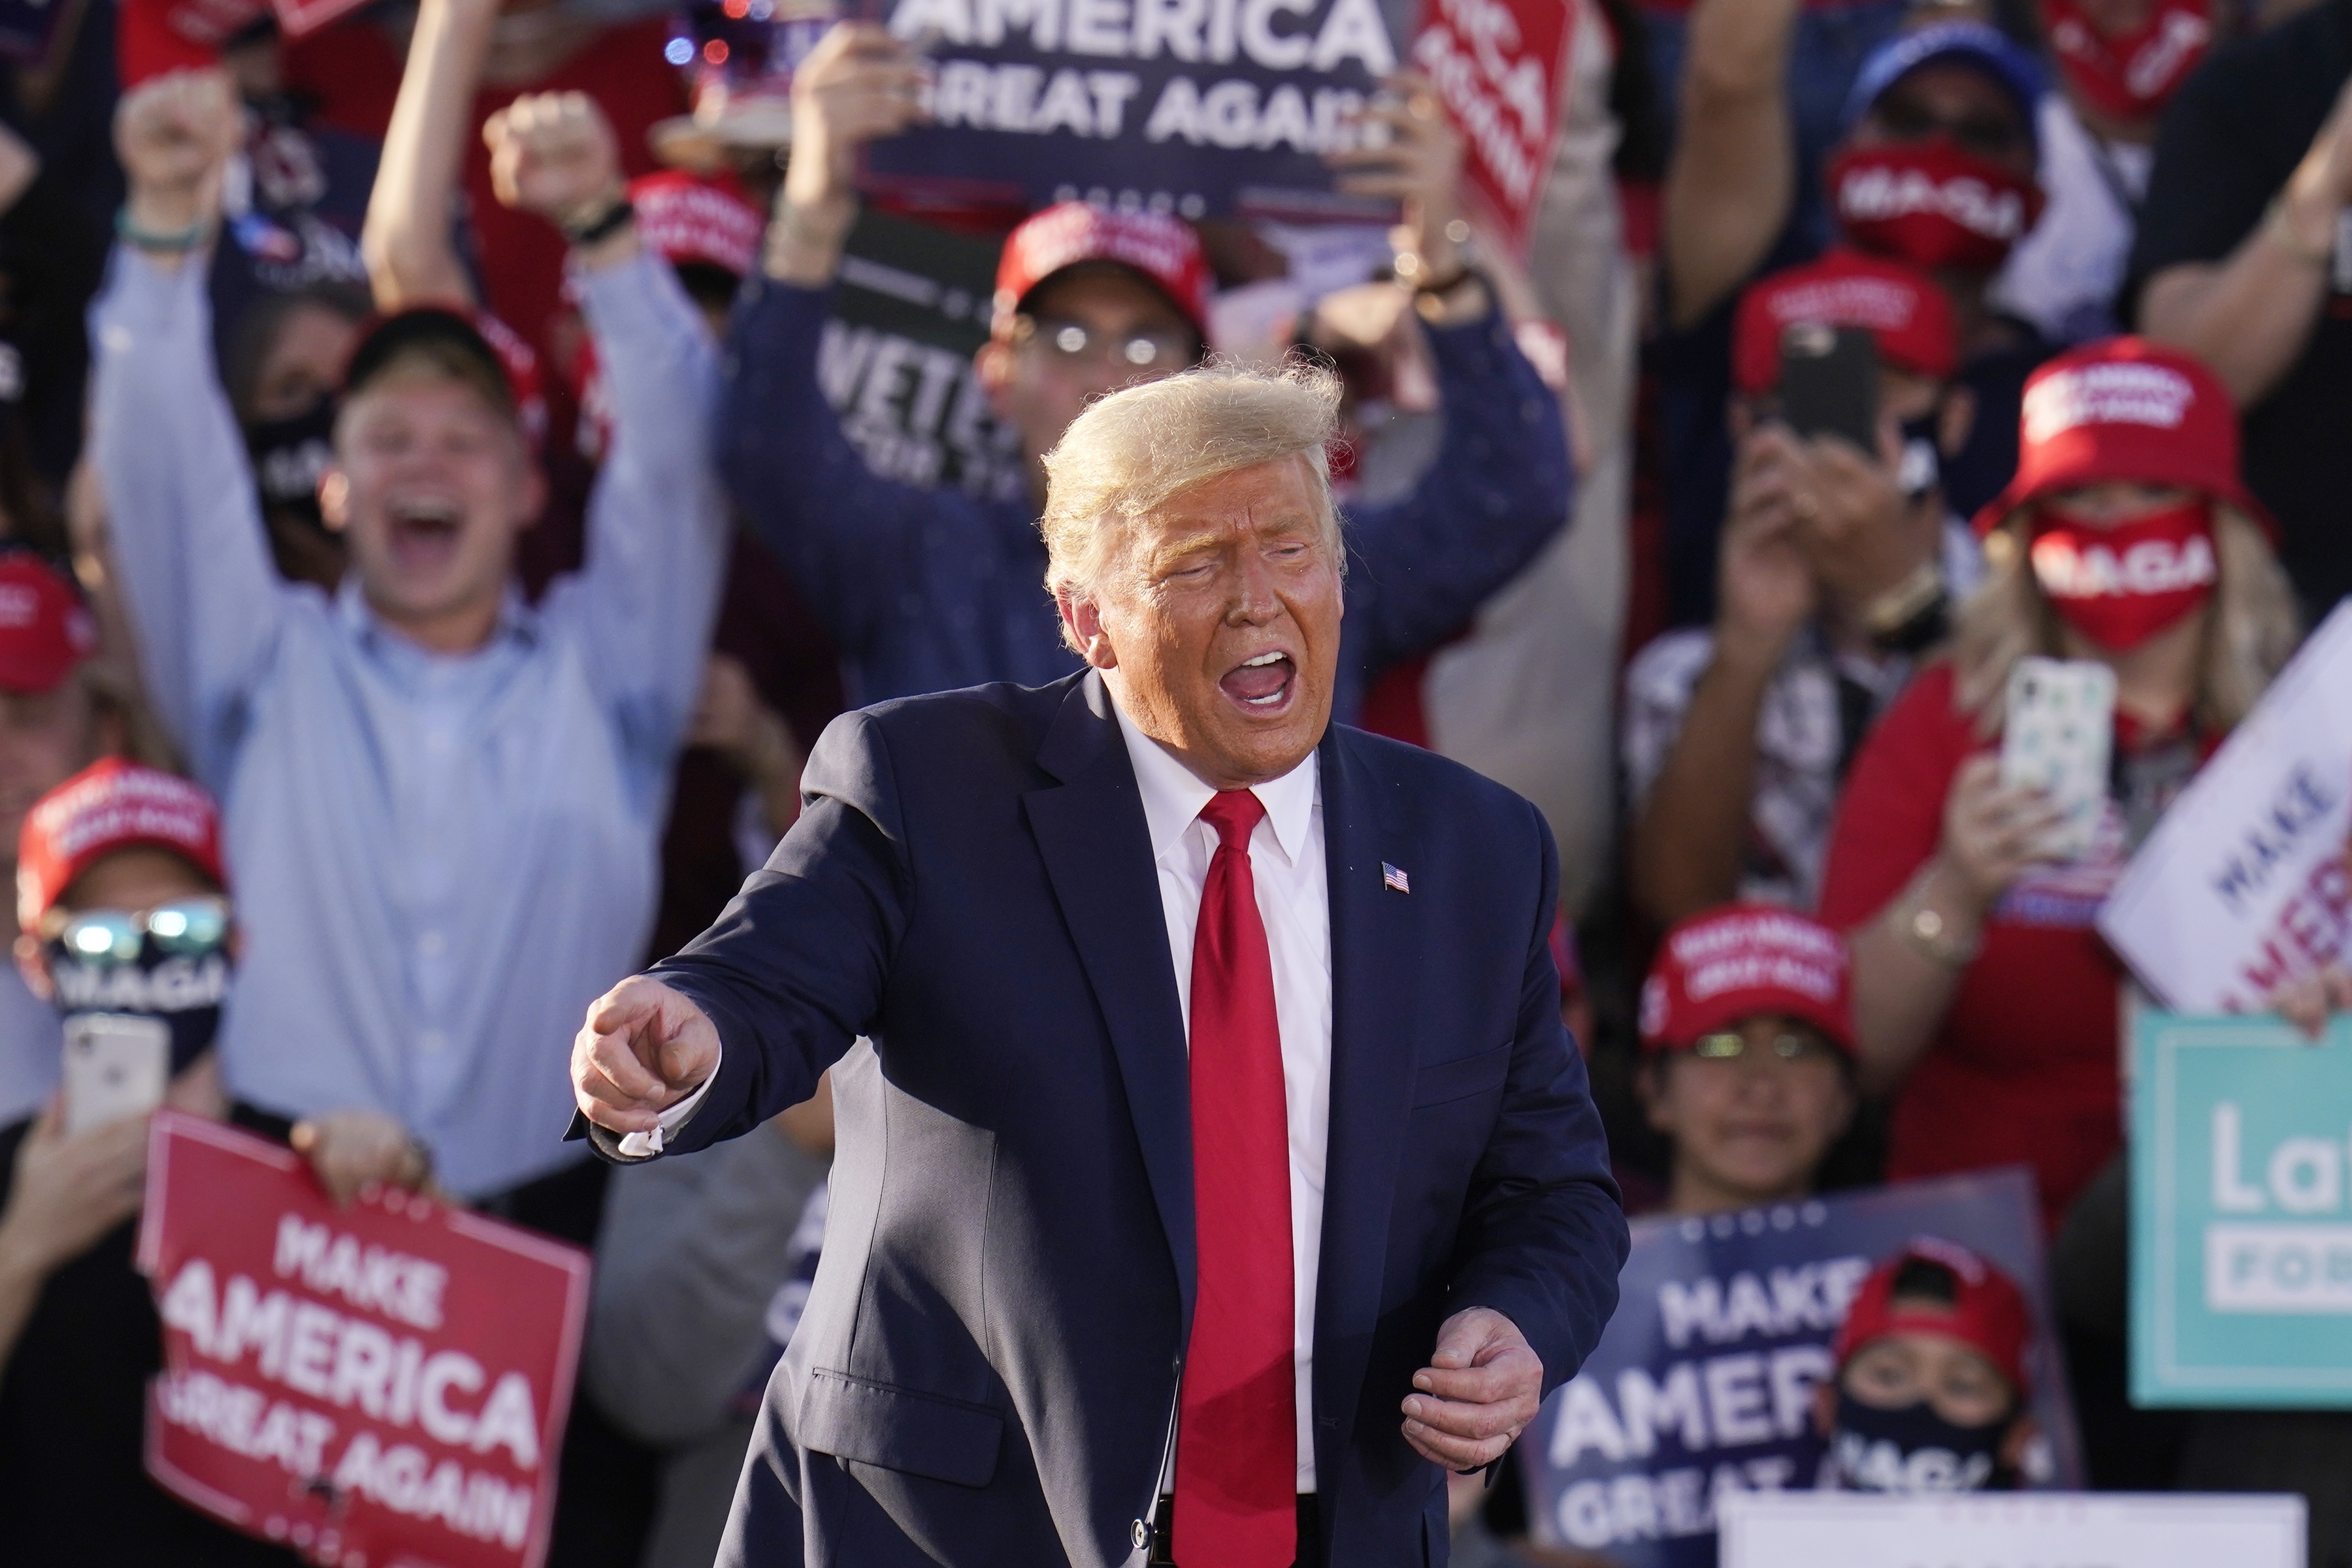 President Donald Trump works the crowd after speaking at a campaign rally Monday, Oct. 19, 2020, in Tucson, Ariz. Photo: AP